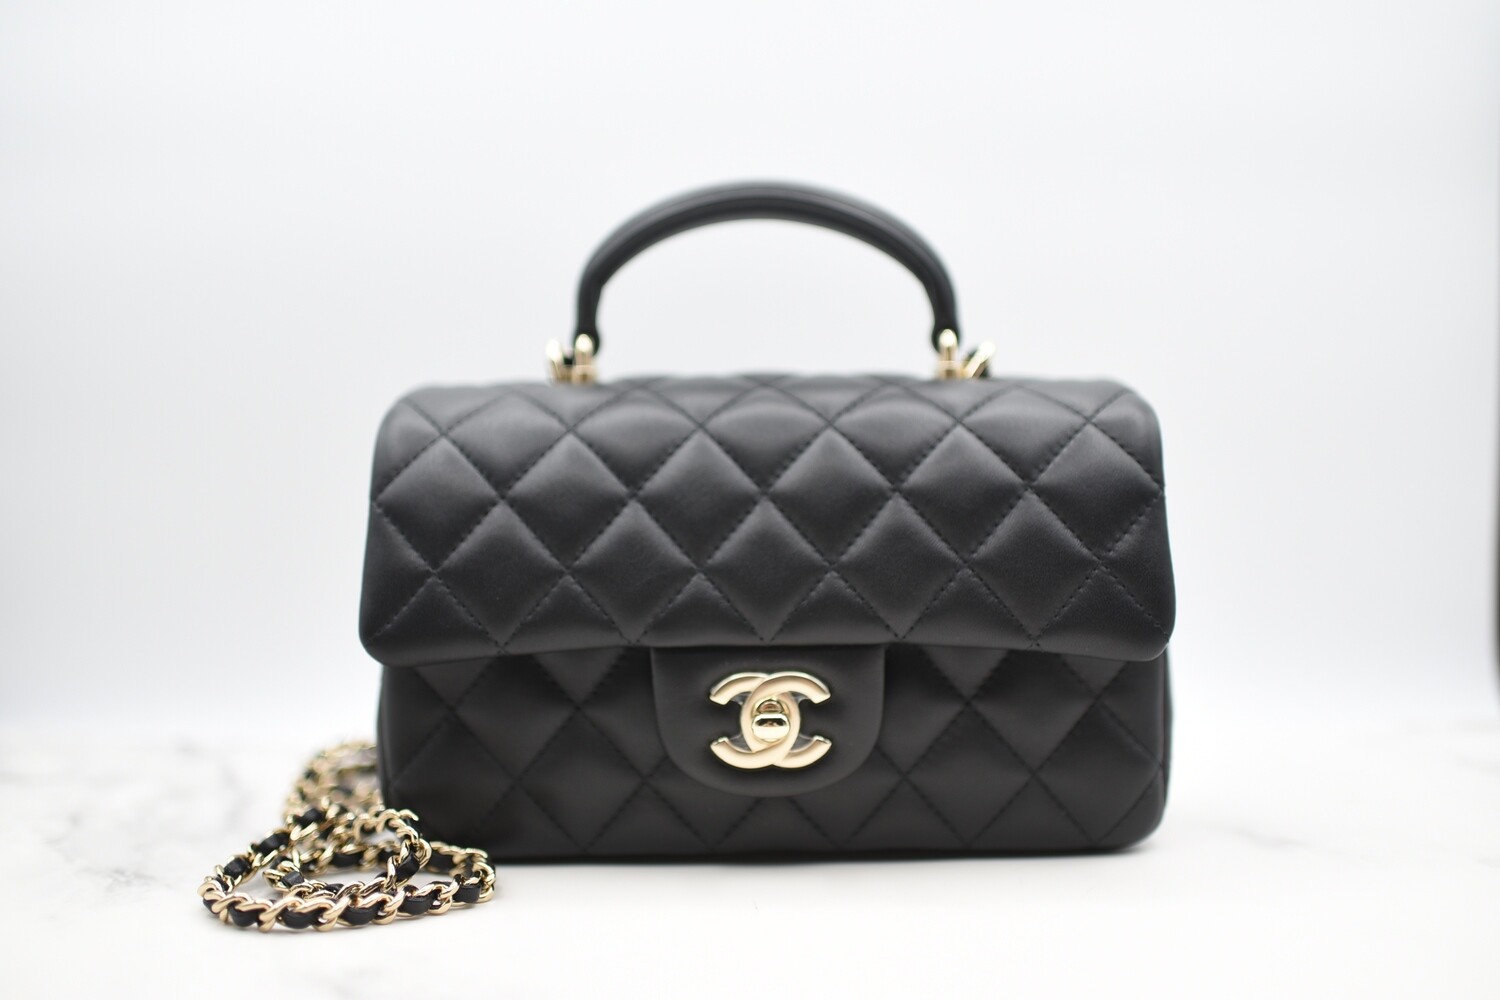 Chanel Mini with Top Handle, Black Lambskin with Light Gold Hardware, New  in Dustbag GA003